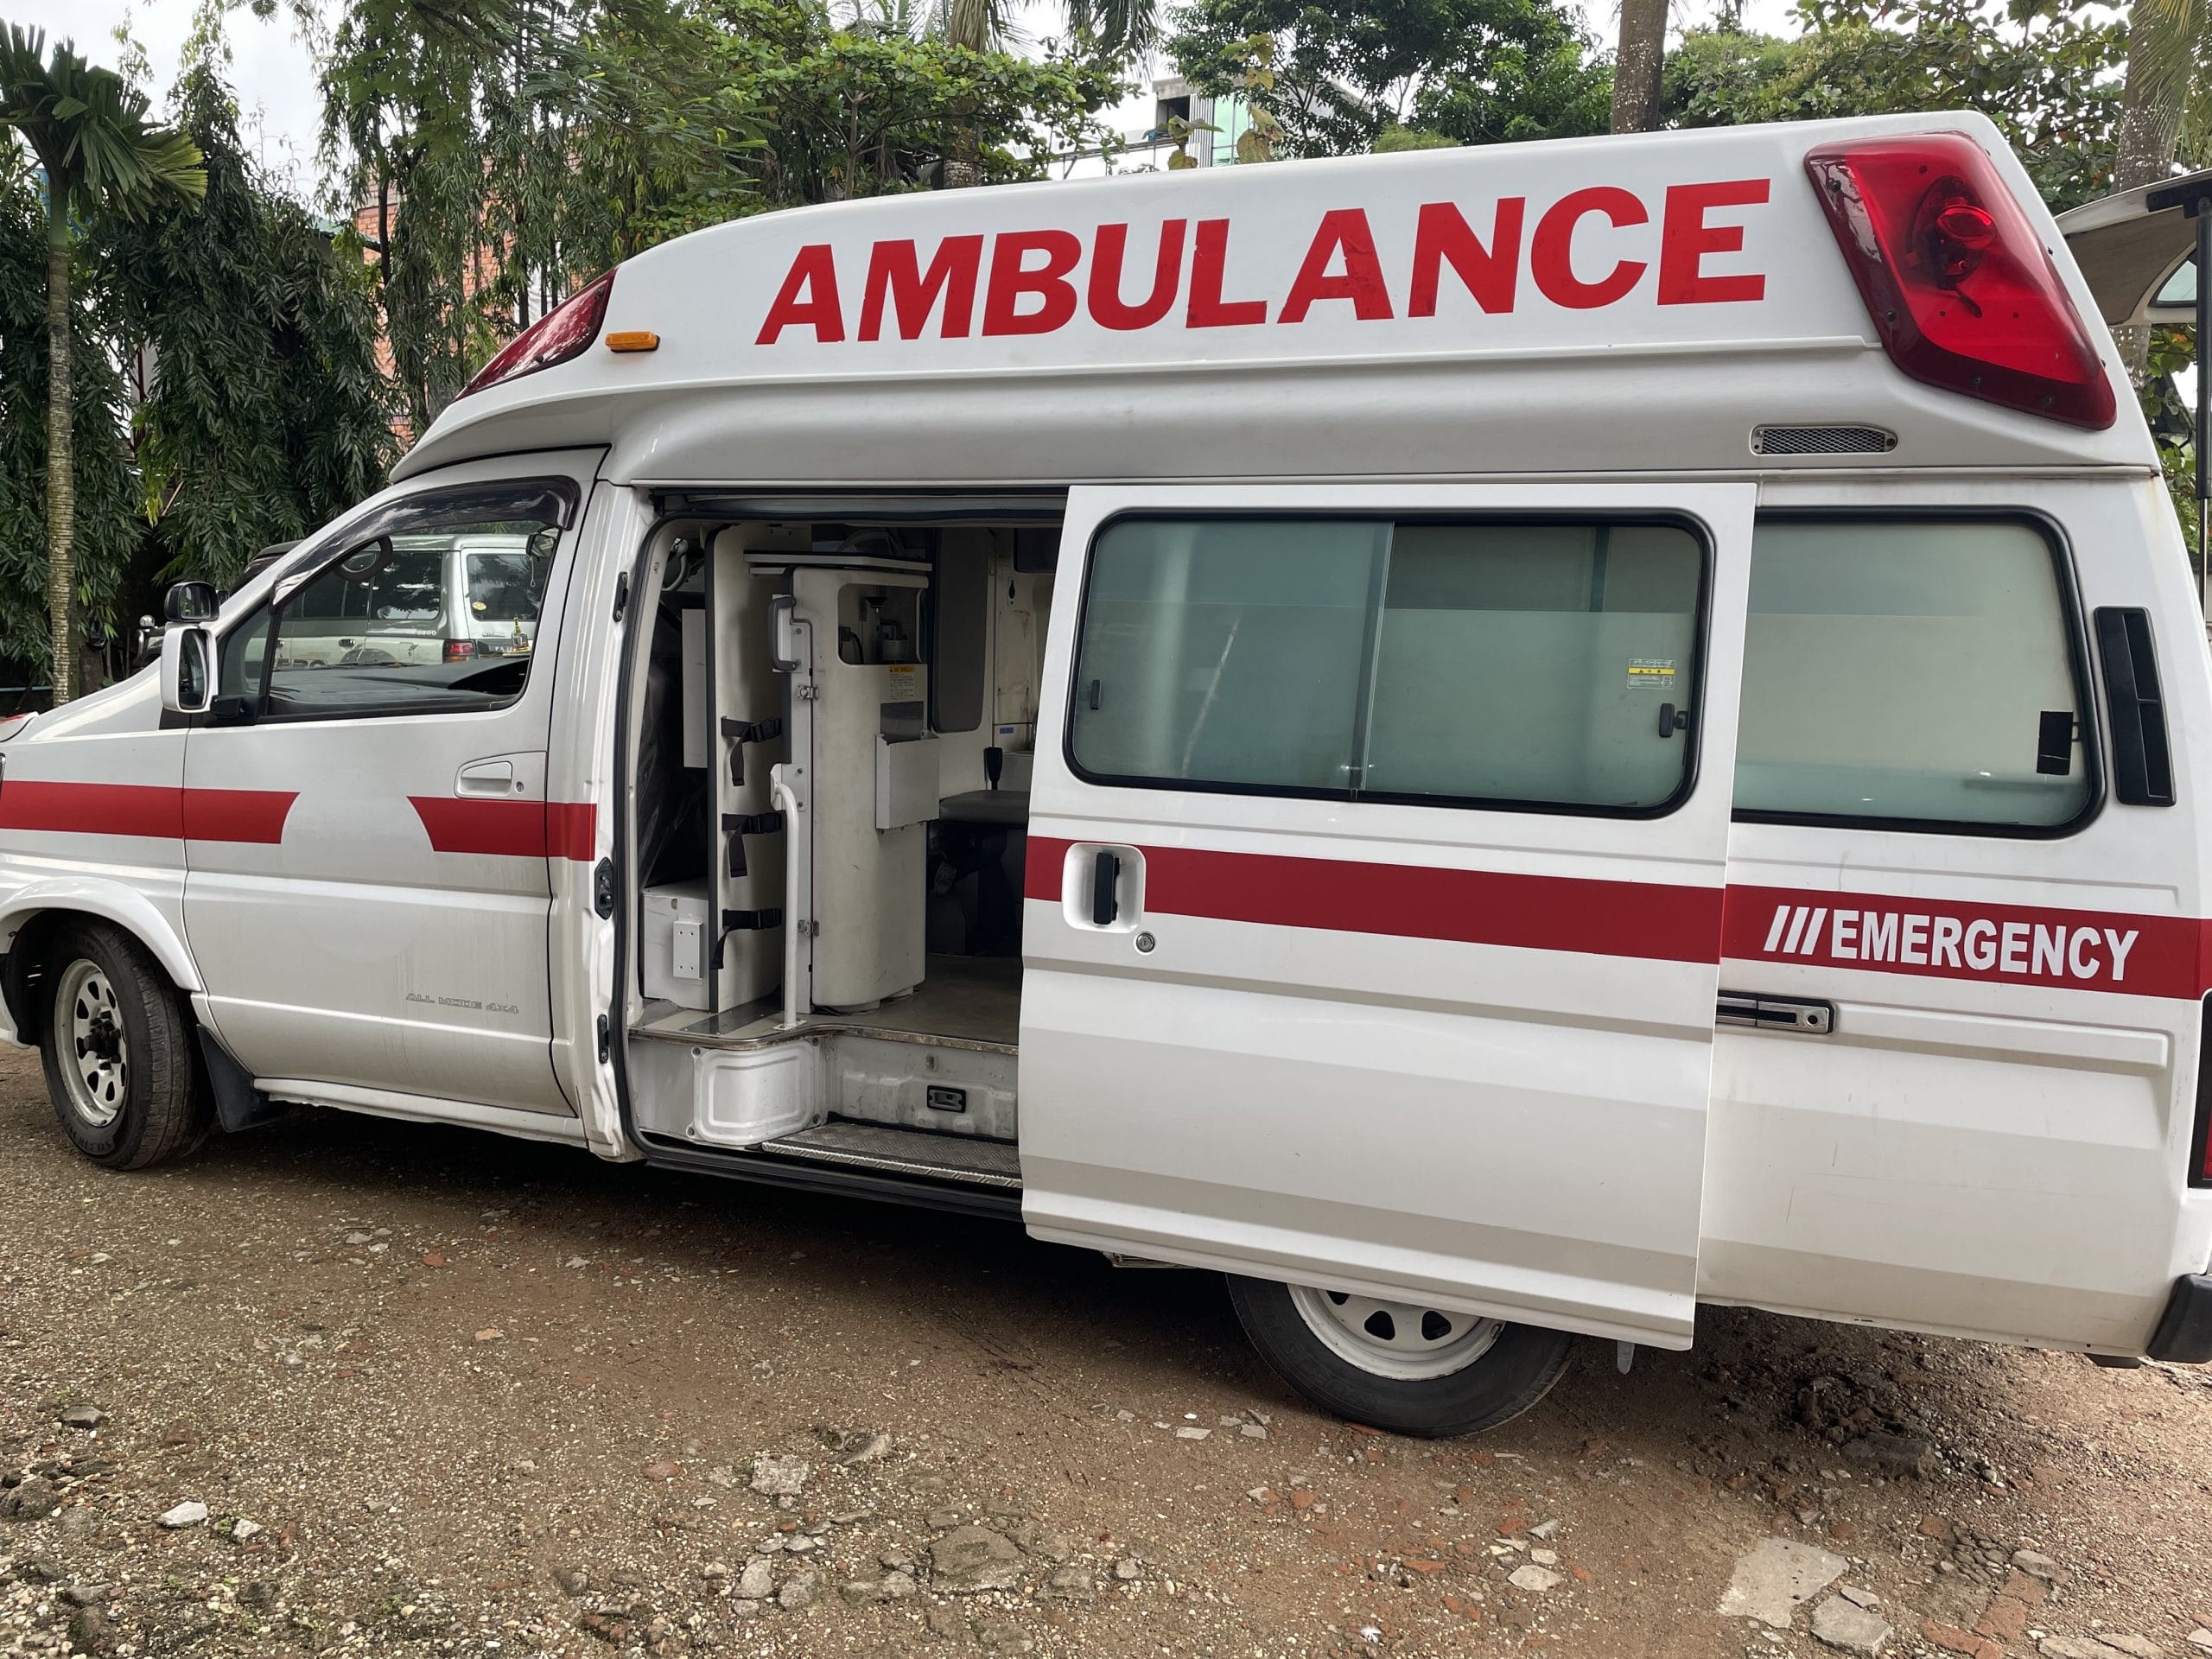 GGI Myanmar (Green Gold Industry) has teamed up with a humanitarian group to operate an ambulance for the people of Yangon